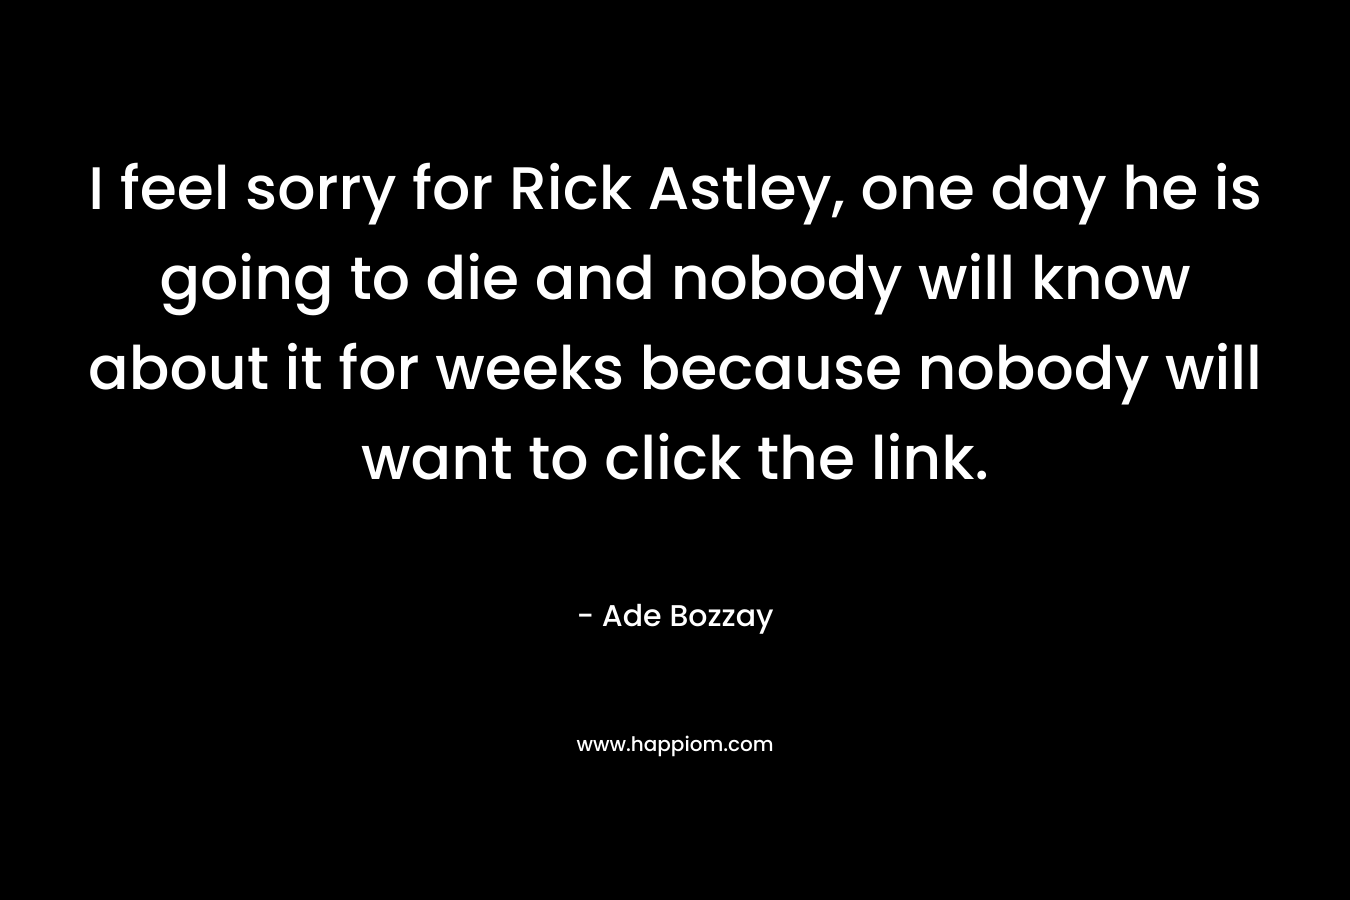 I feel sorry for Rick Astley, one day he is going to die and nobody will know about it for weeks because nobody will want to click the link.